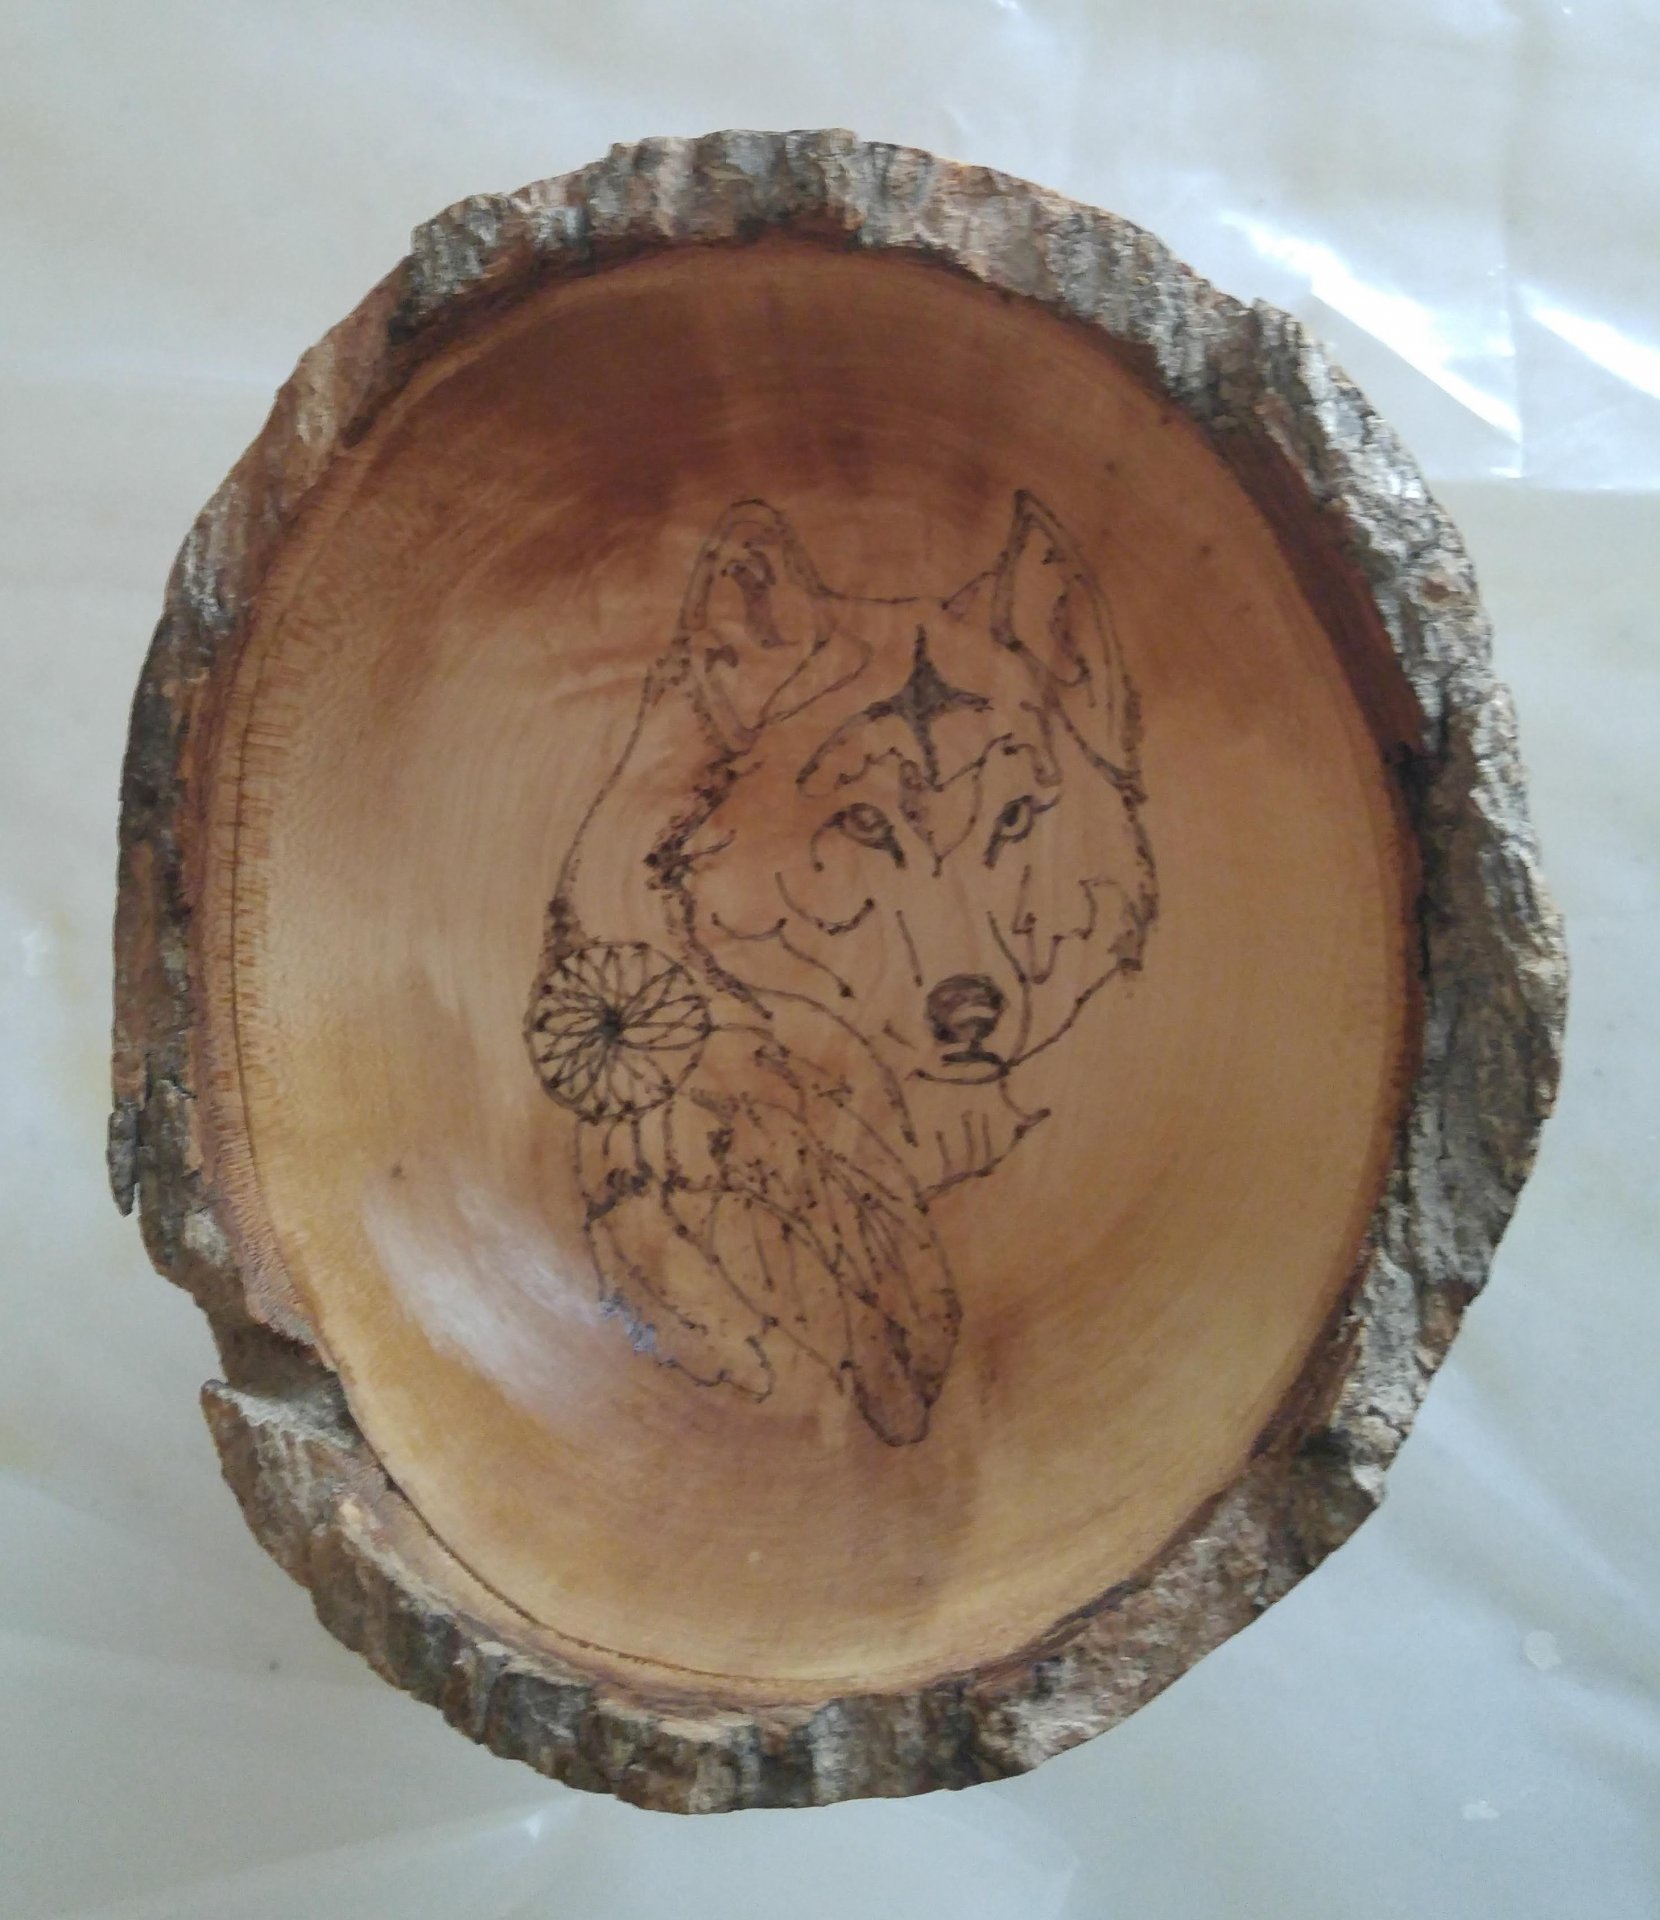 Playing with pyrography